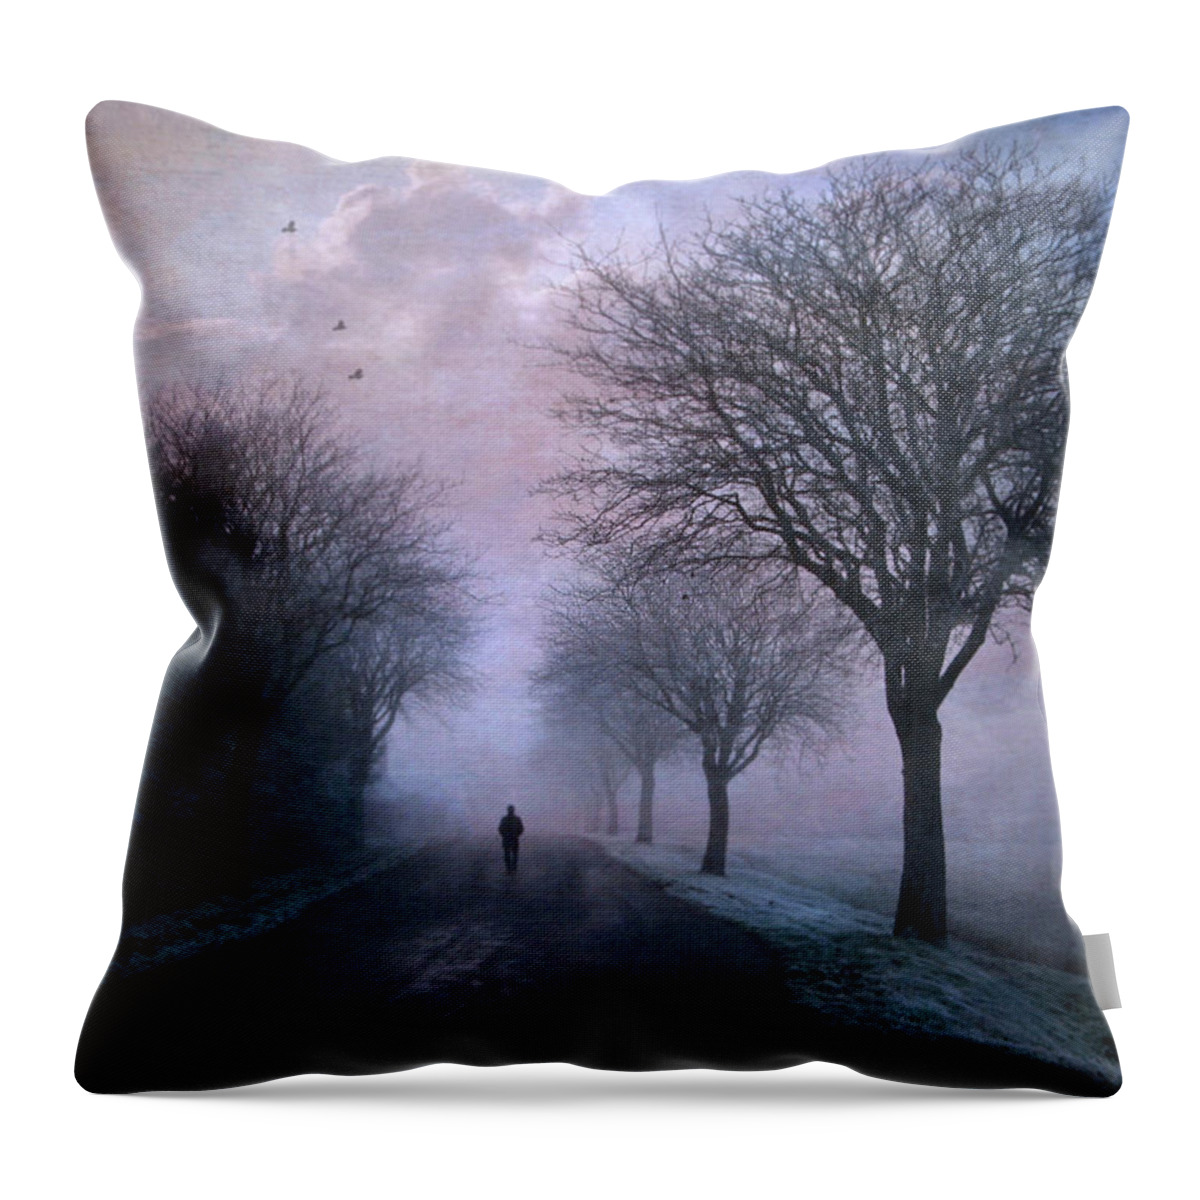 Person On Snowy Street Throw Pillow featuring the photograph A Winter's Stroll by Susan Maxwell Schmidt